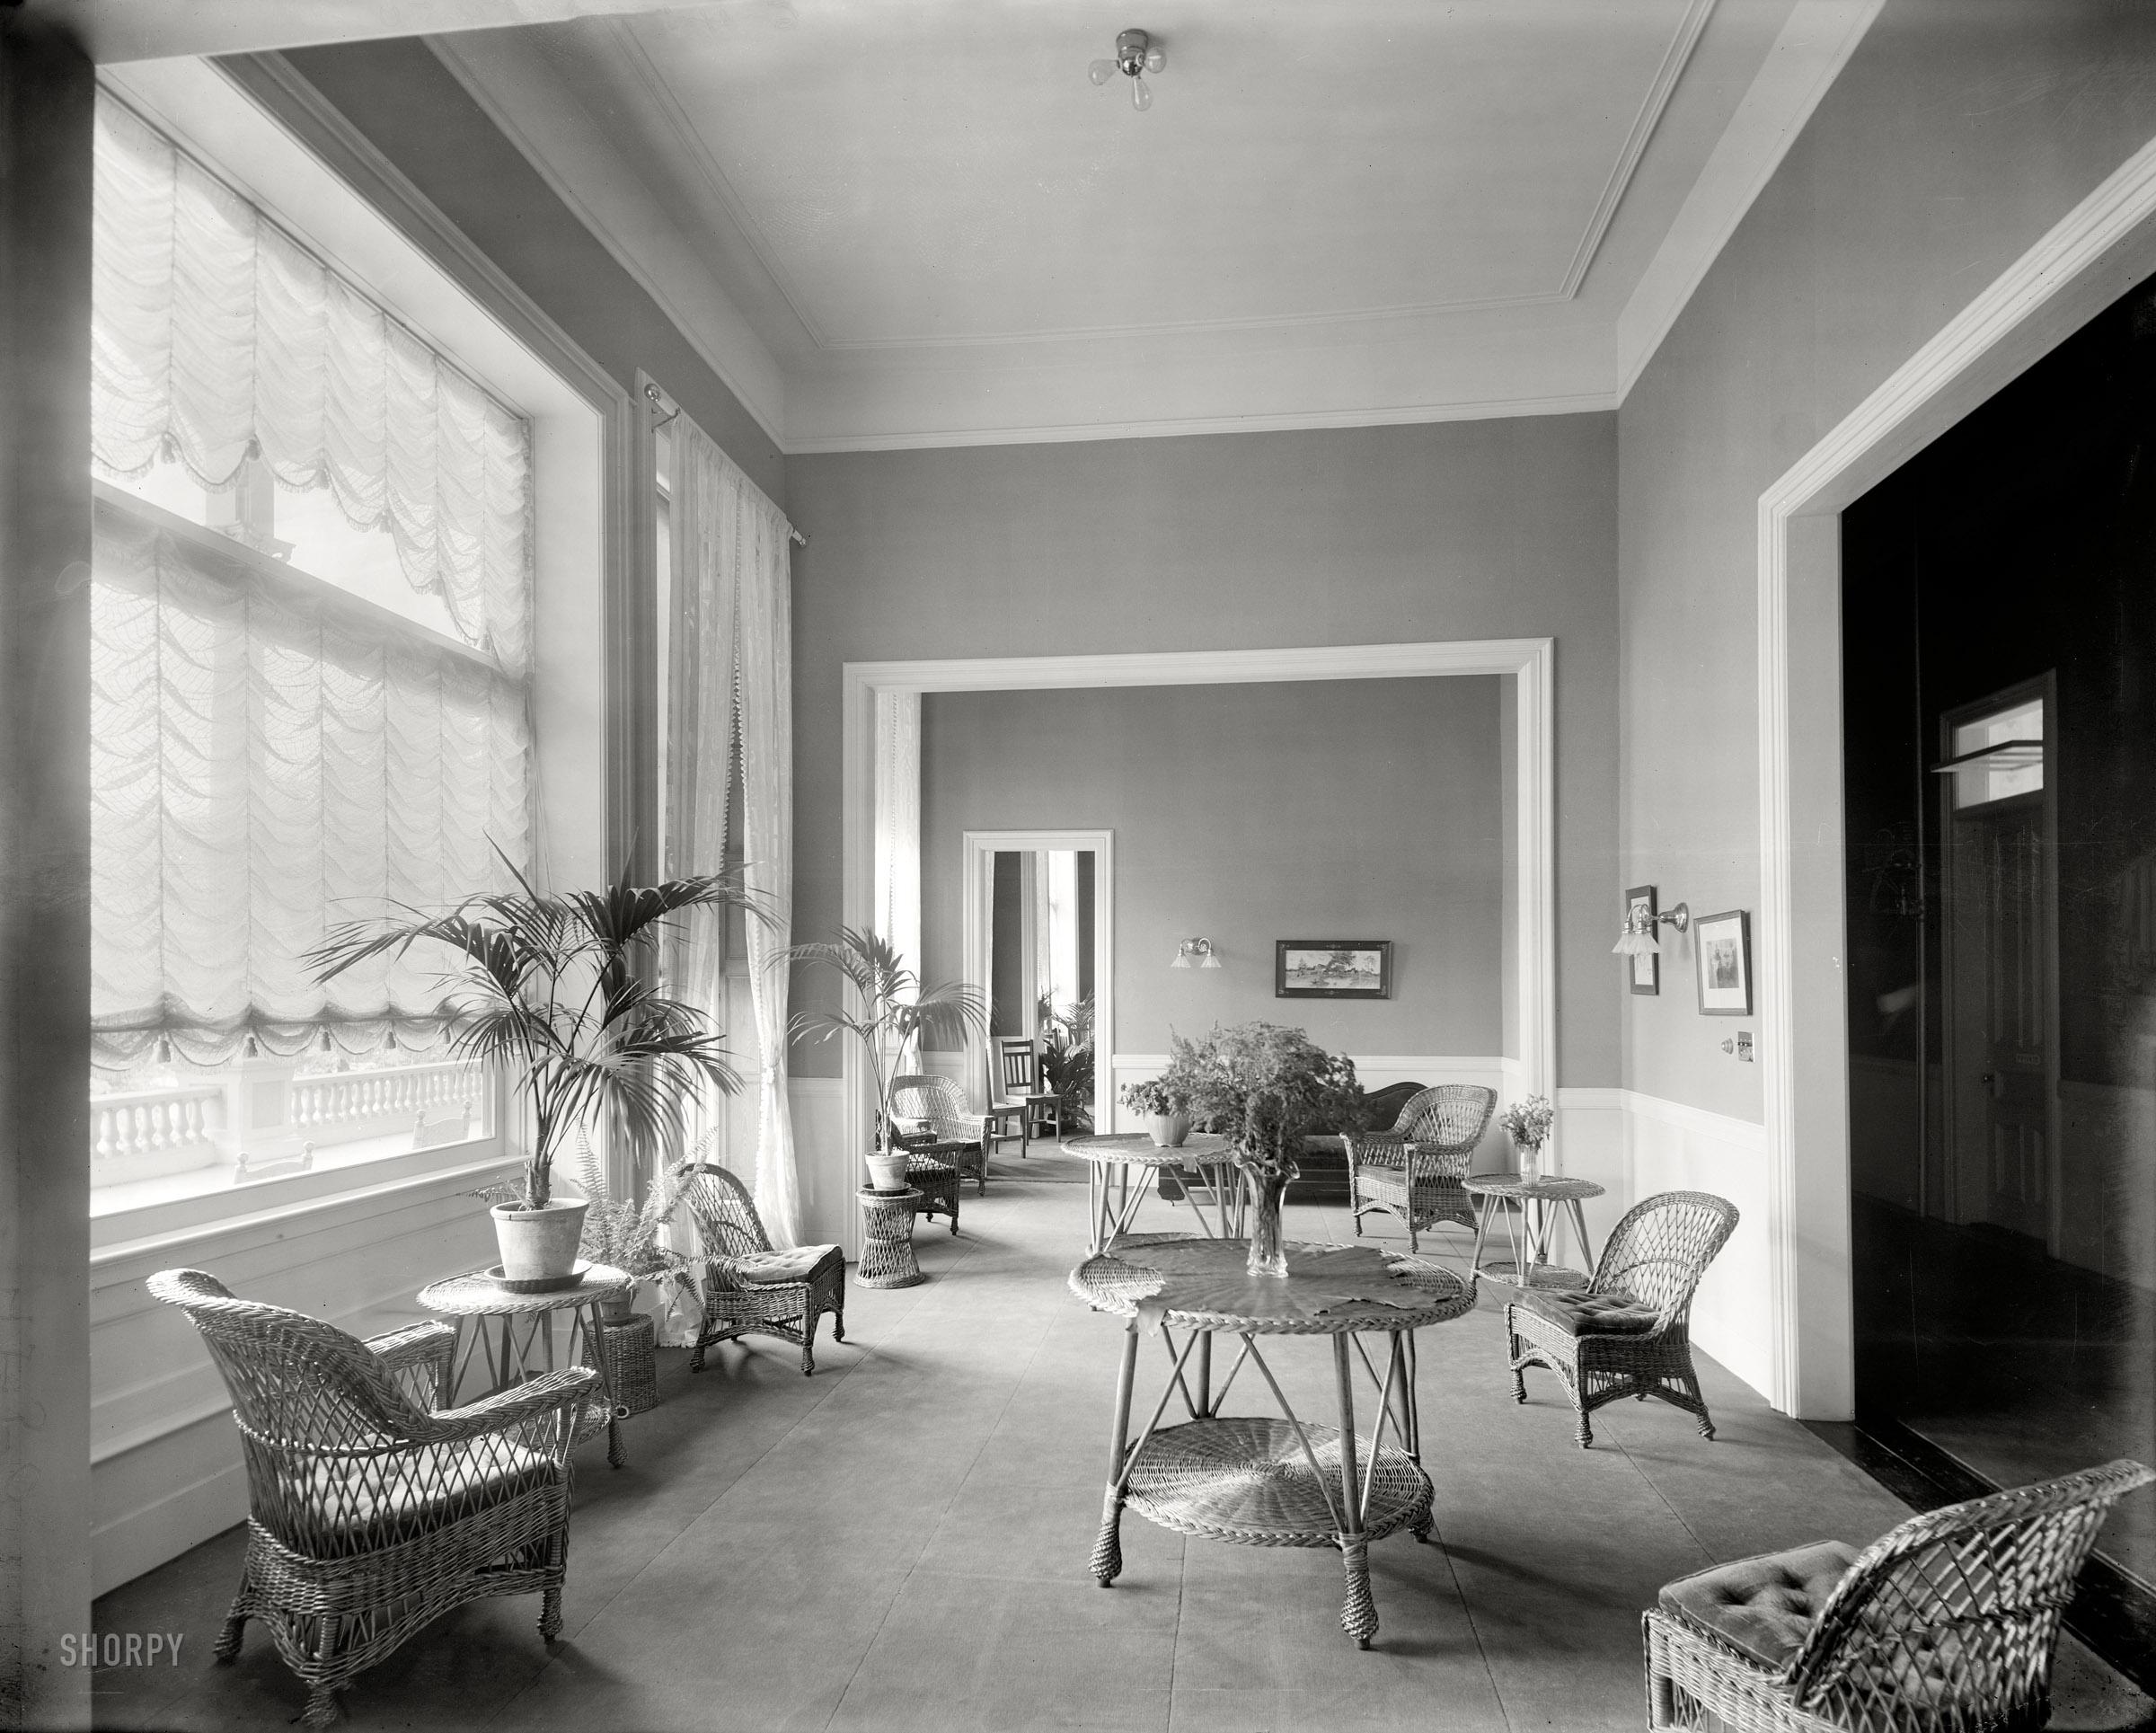 Lake George, New York, circa 1908. "Ladies' parlor, Fort William Henry Hotel." 8x10 inch dry plate glass negative, Detroit Publishing Company. View full size.